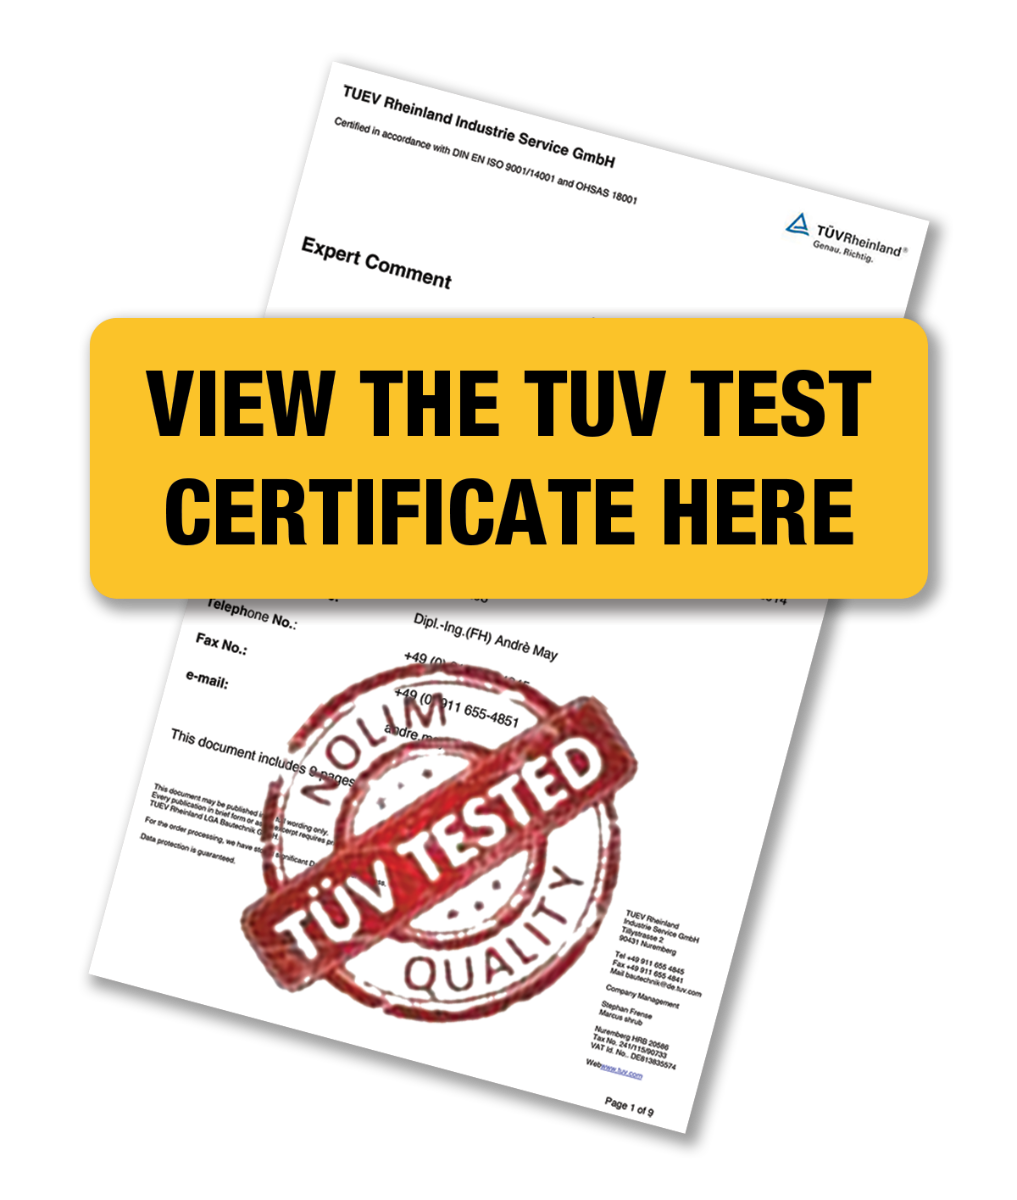 View the TUV Test Certificate here